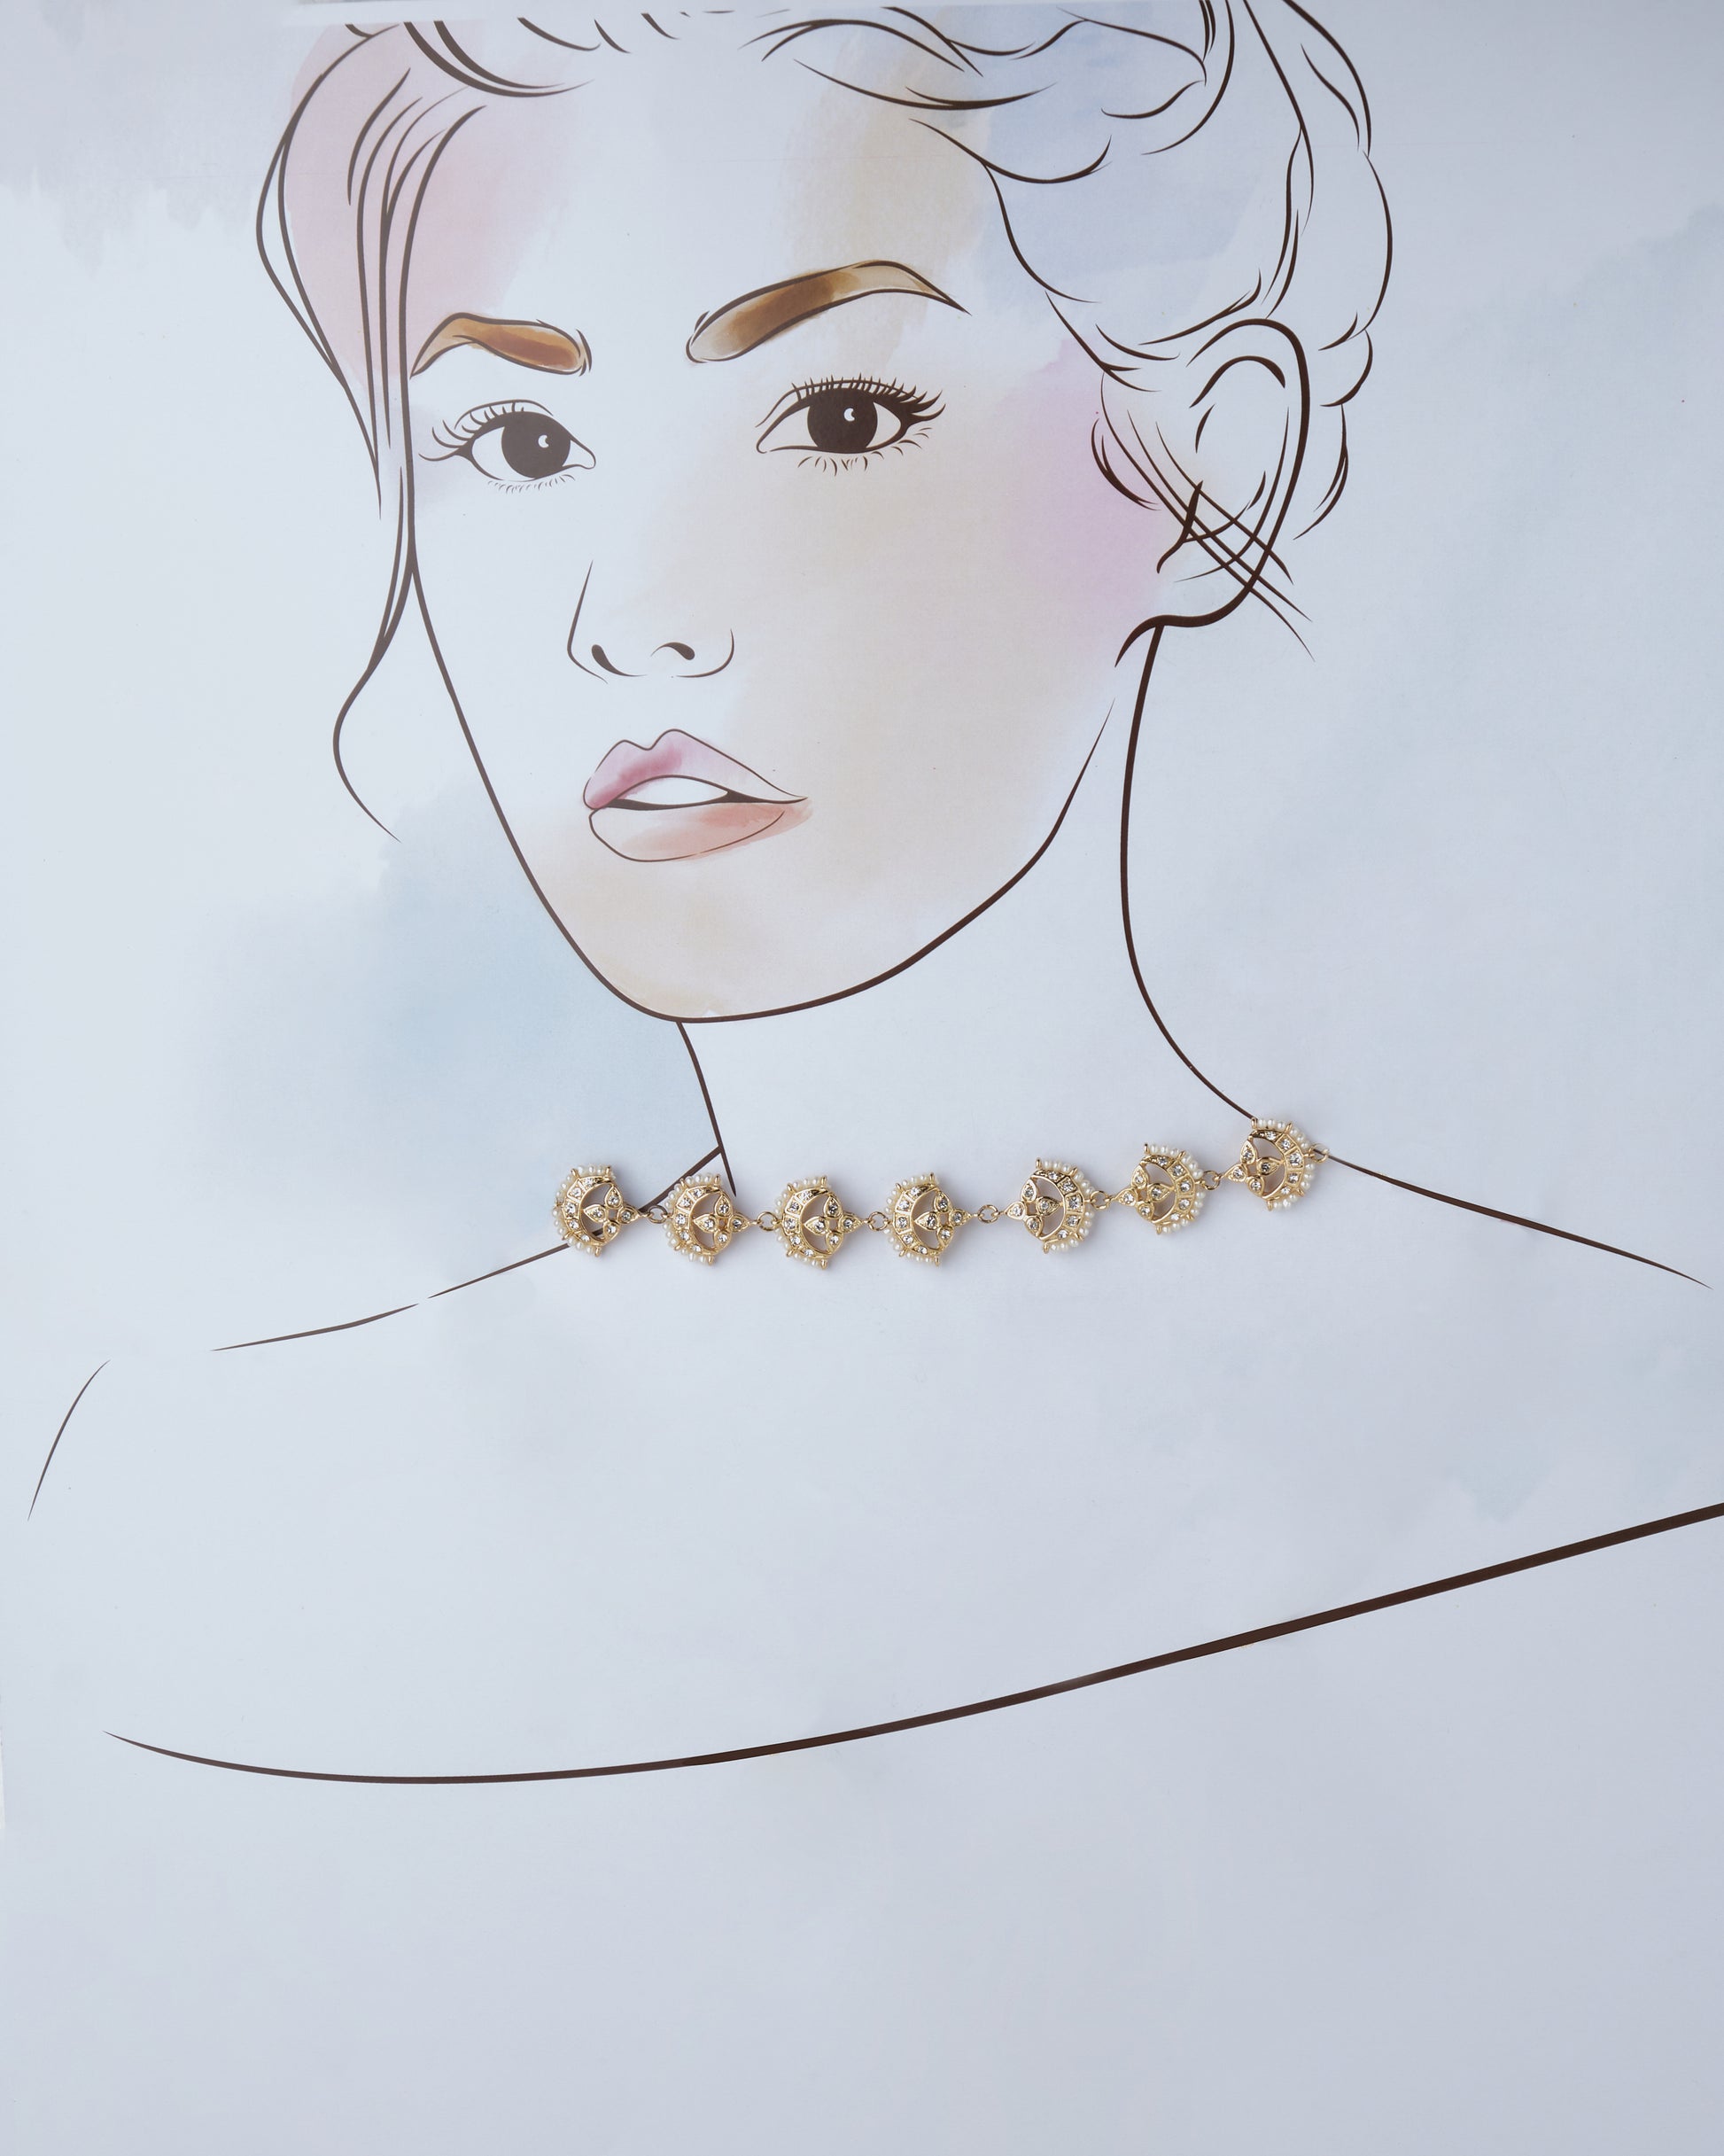 Illustration of a woman with stylized features wearing The Nereida Necklet Necklace by Chandrani Pearls.